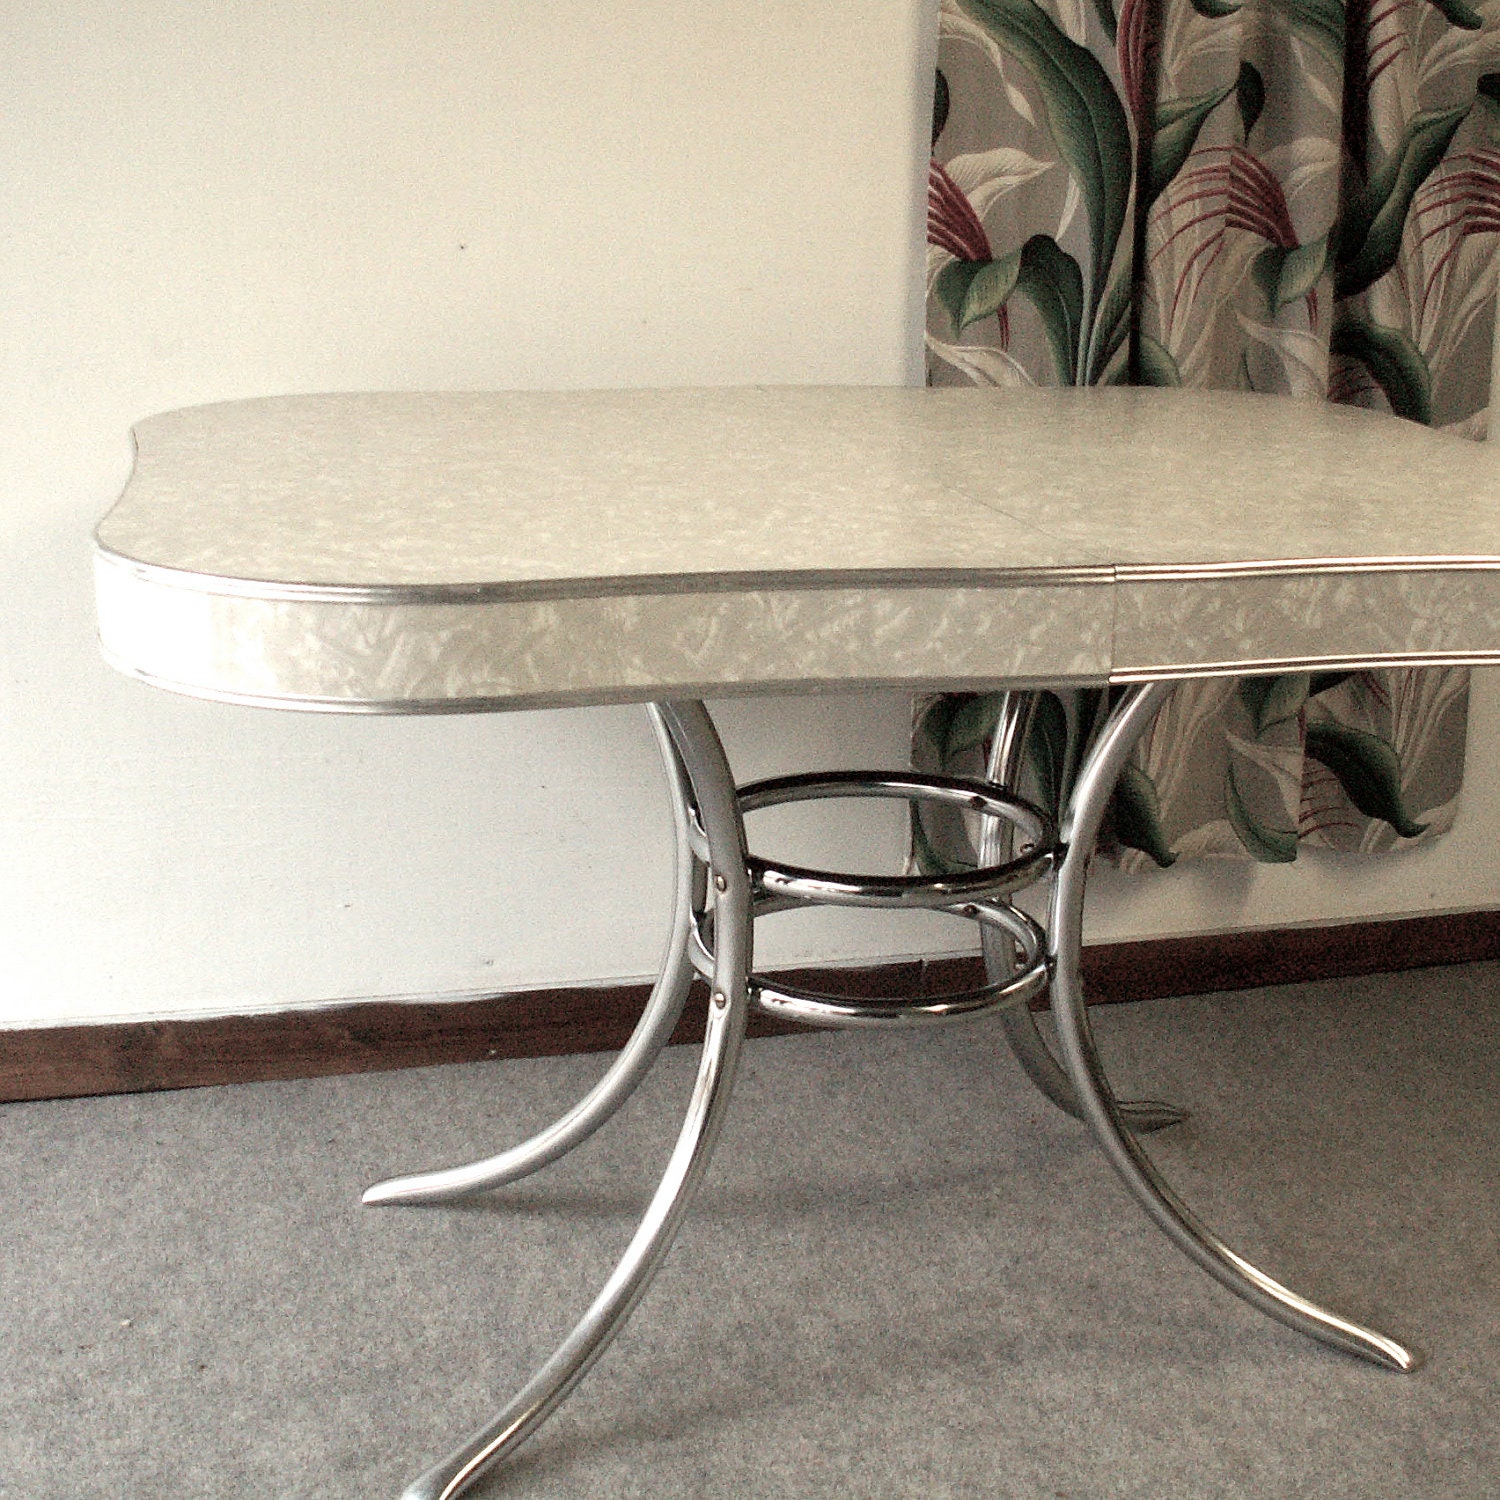 Vintage 1950s Formica and Chrome Kitchen Table